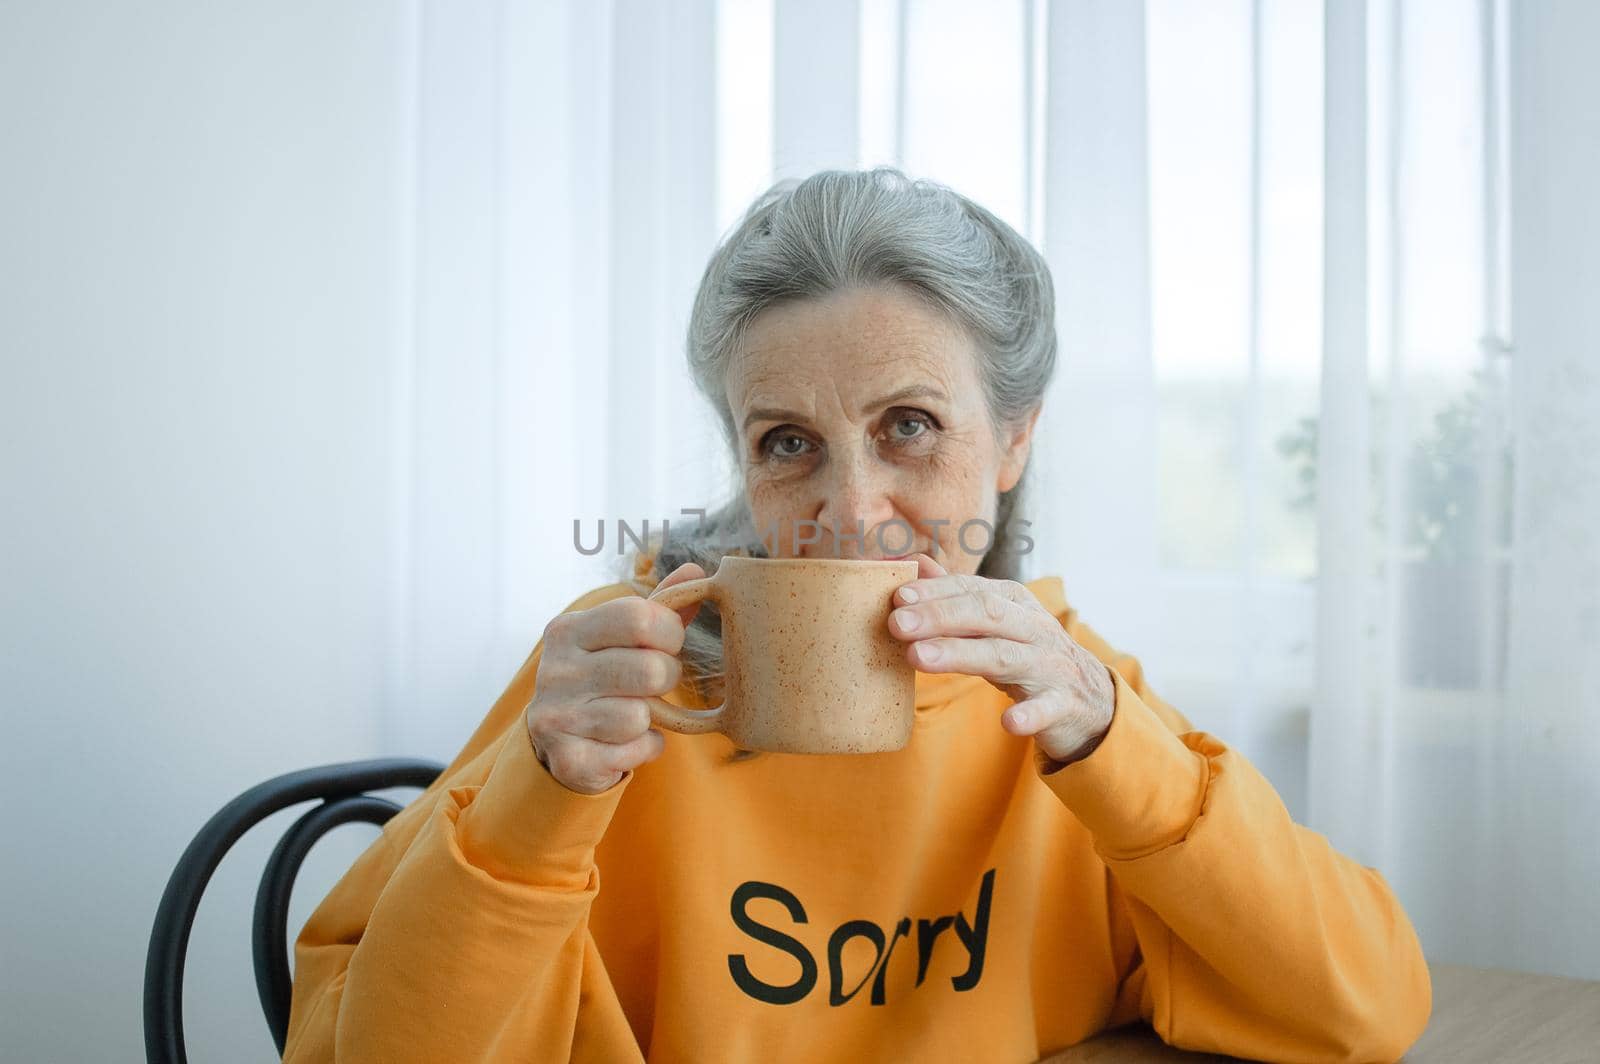 Elderly gray-haired woman is drinking coffee while sitting at home. Happy retirement.